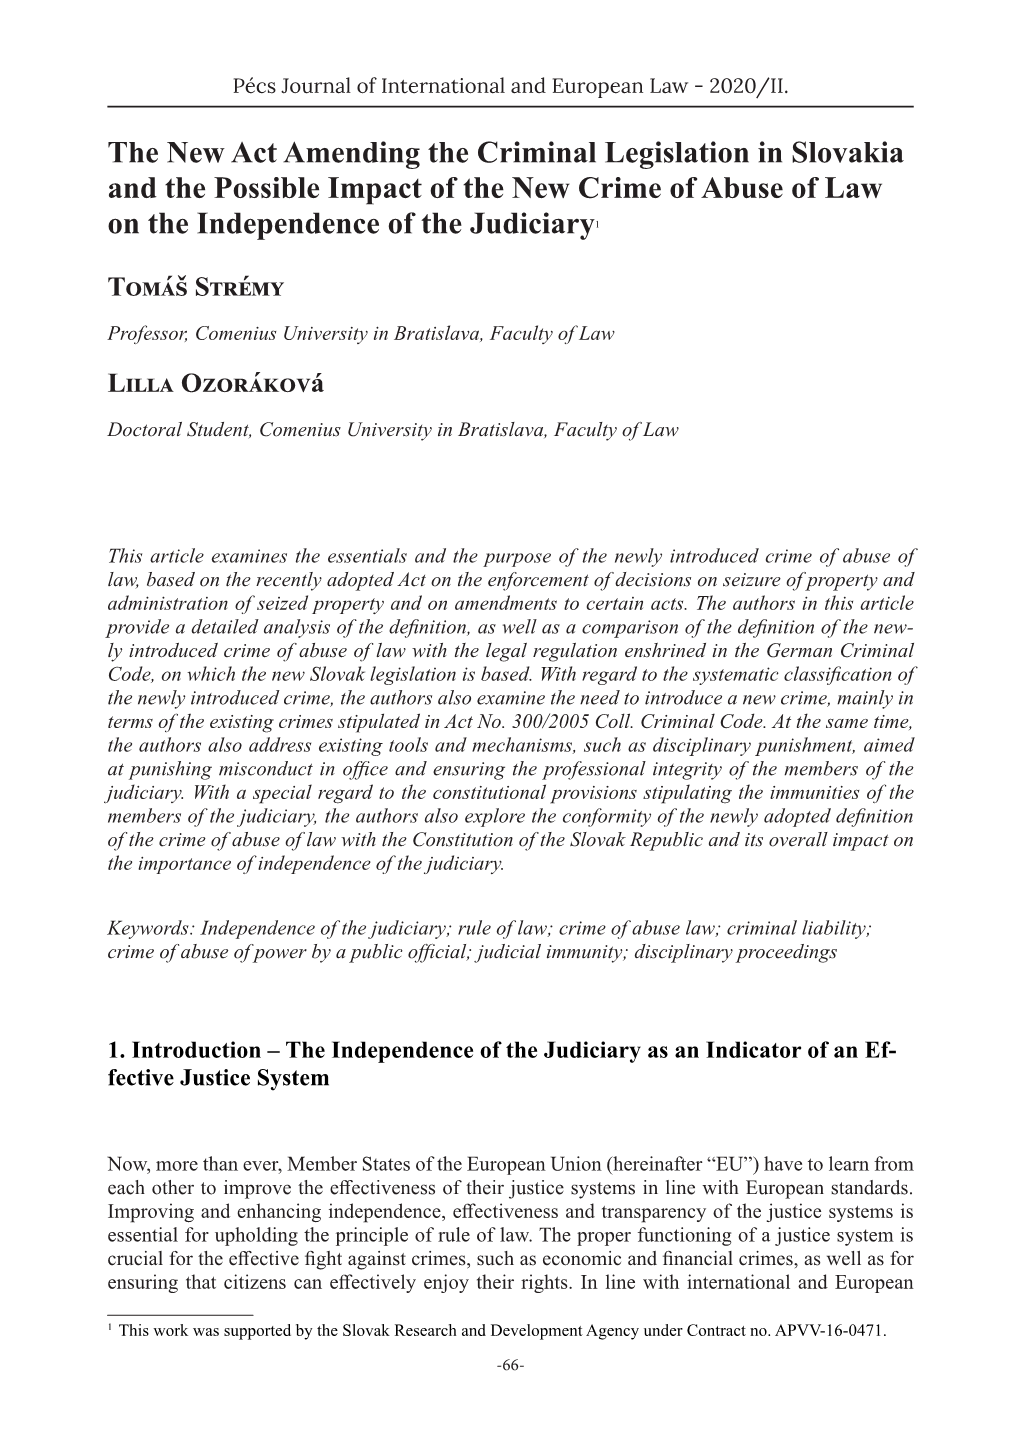 The New Act Amending the Criminal Legislation in Slovakia and the Possible Impact of the New Crime of Abuse of Law on the Independence of the Judiciary1